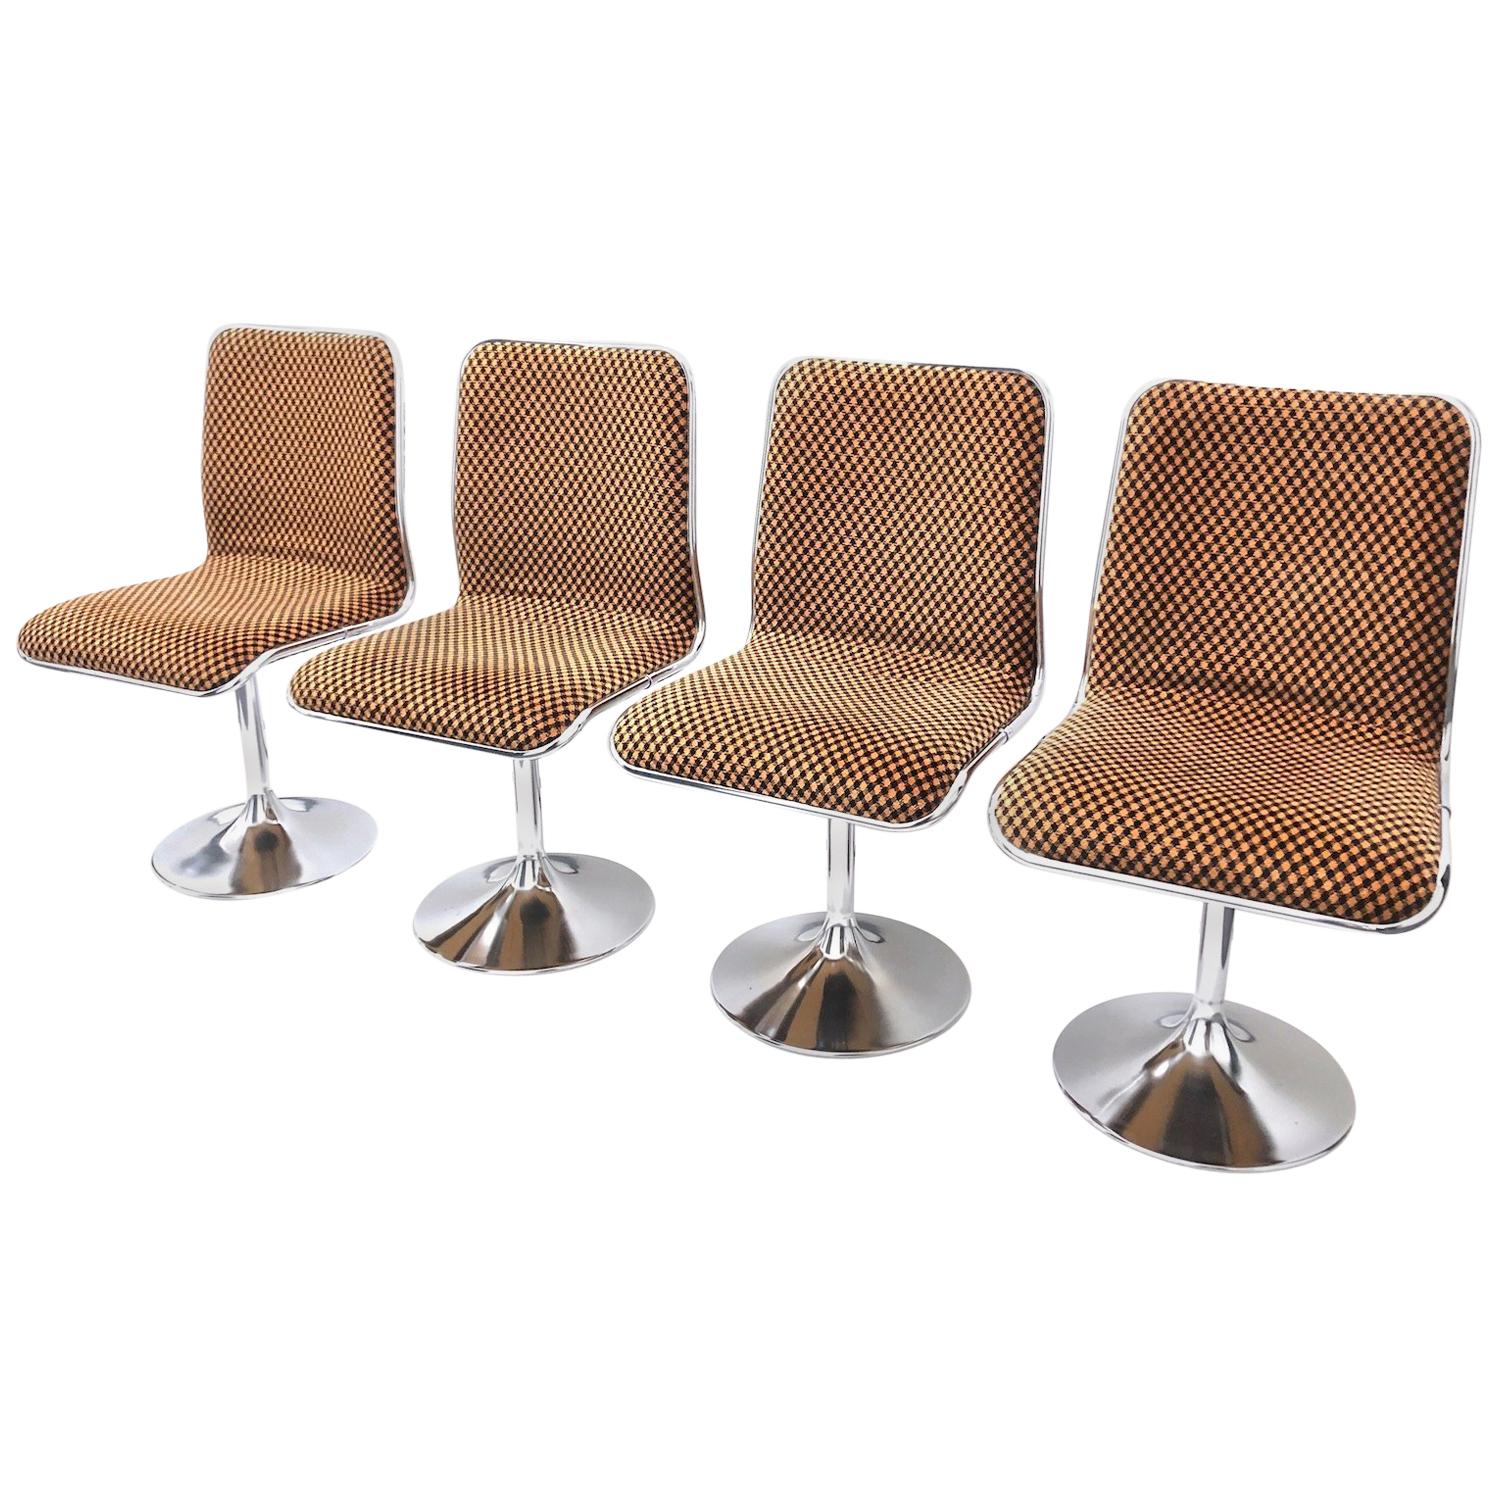 Four Tulip Chrome Base Dinning Chairs made by Tacke, Germany, 1970s